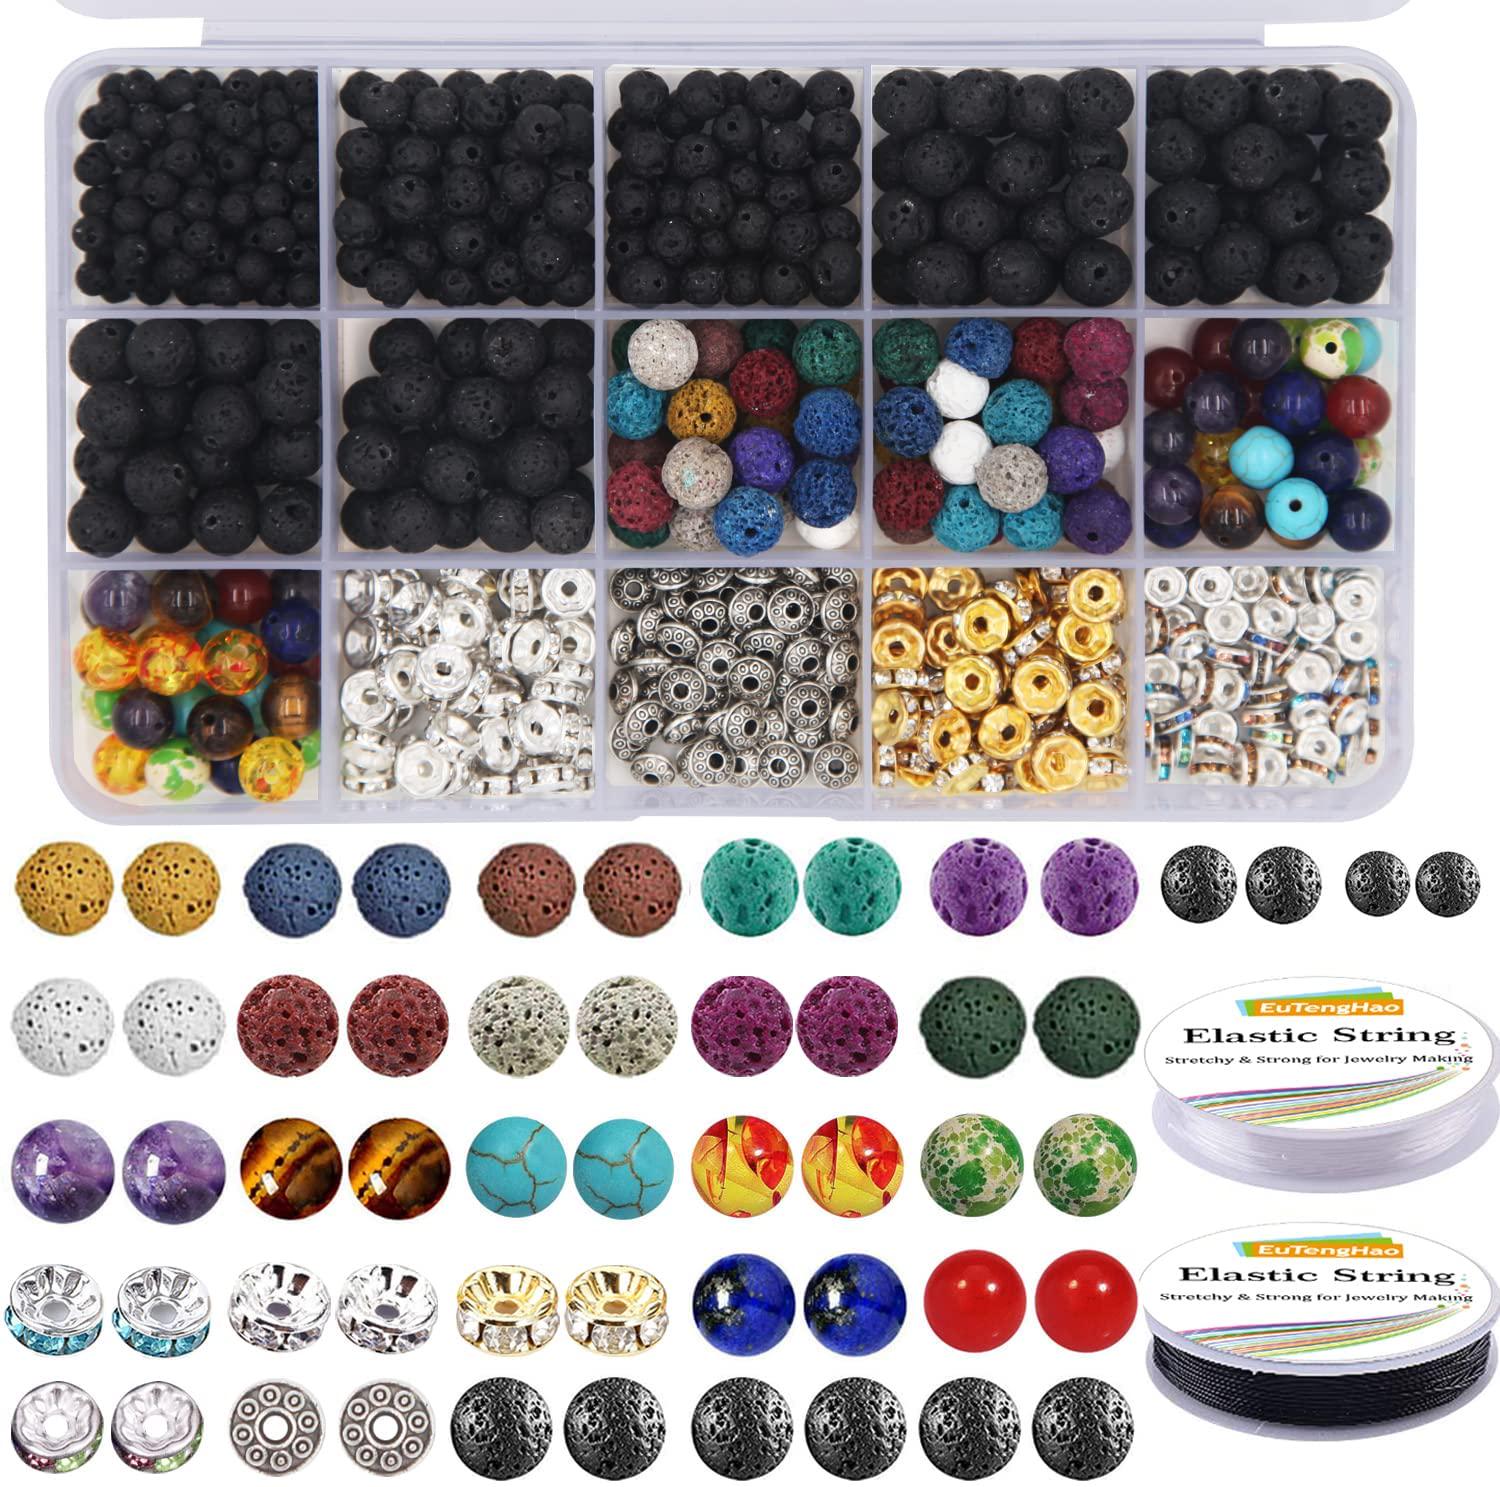 EuTengHao, EuTengHao 602Pcs Lava Beads Stone Kits with 8mm Chakra Beads and Spacers Beads Bracelet Elastic String for Diffuse Essential Oils Adult DIY Jewelry Making Supplies